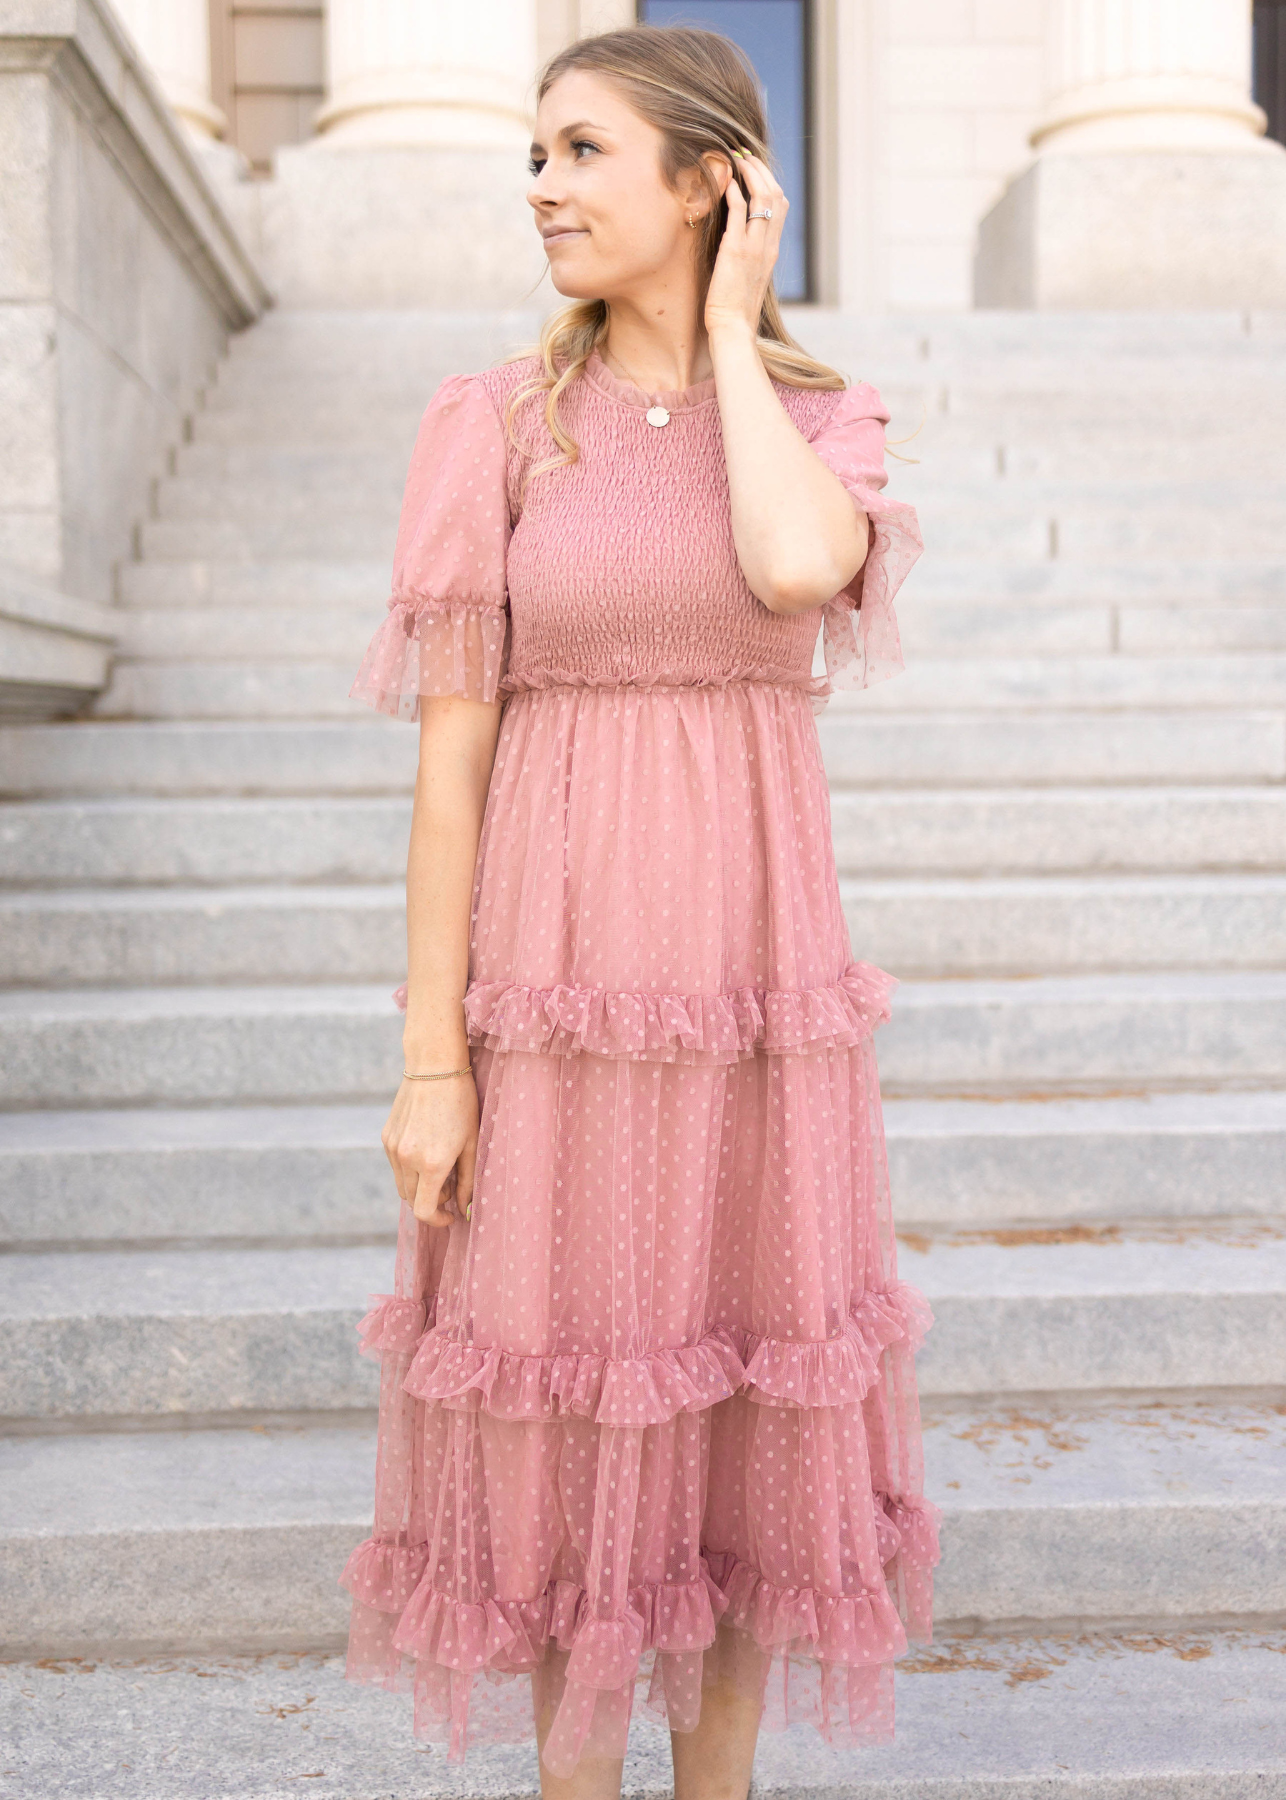 Chanel Rose Dress Reg and Curvy – The House of Dasha